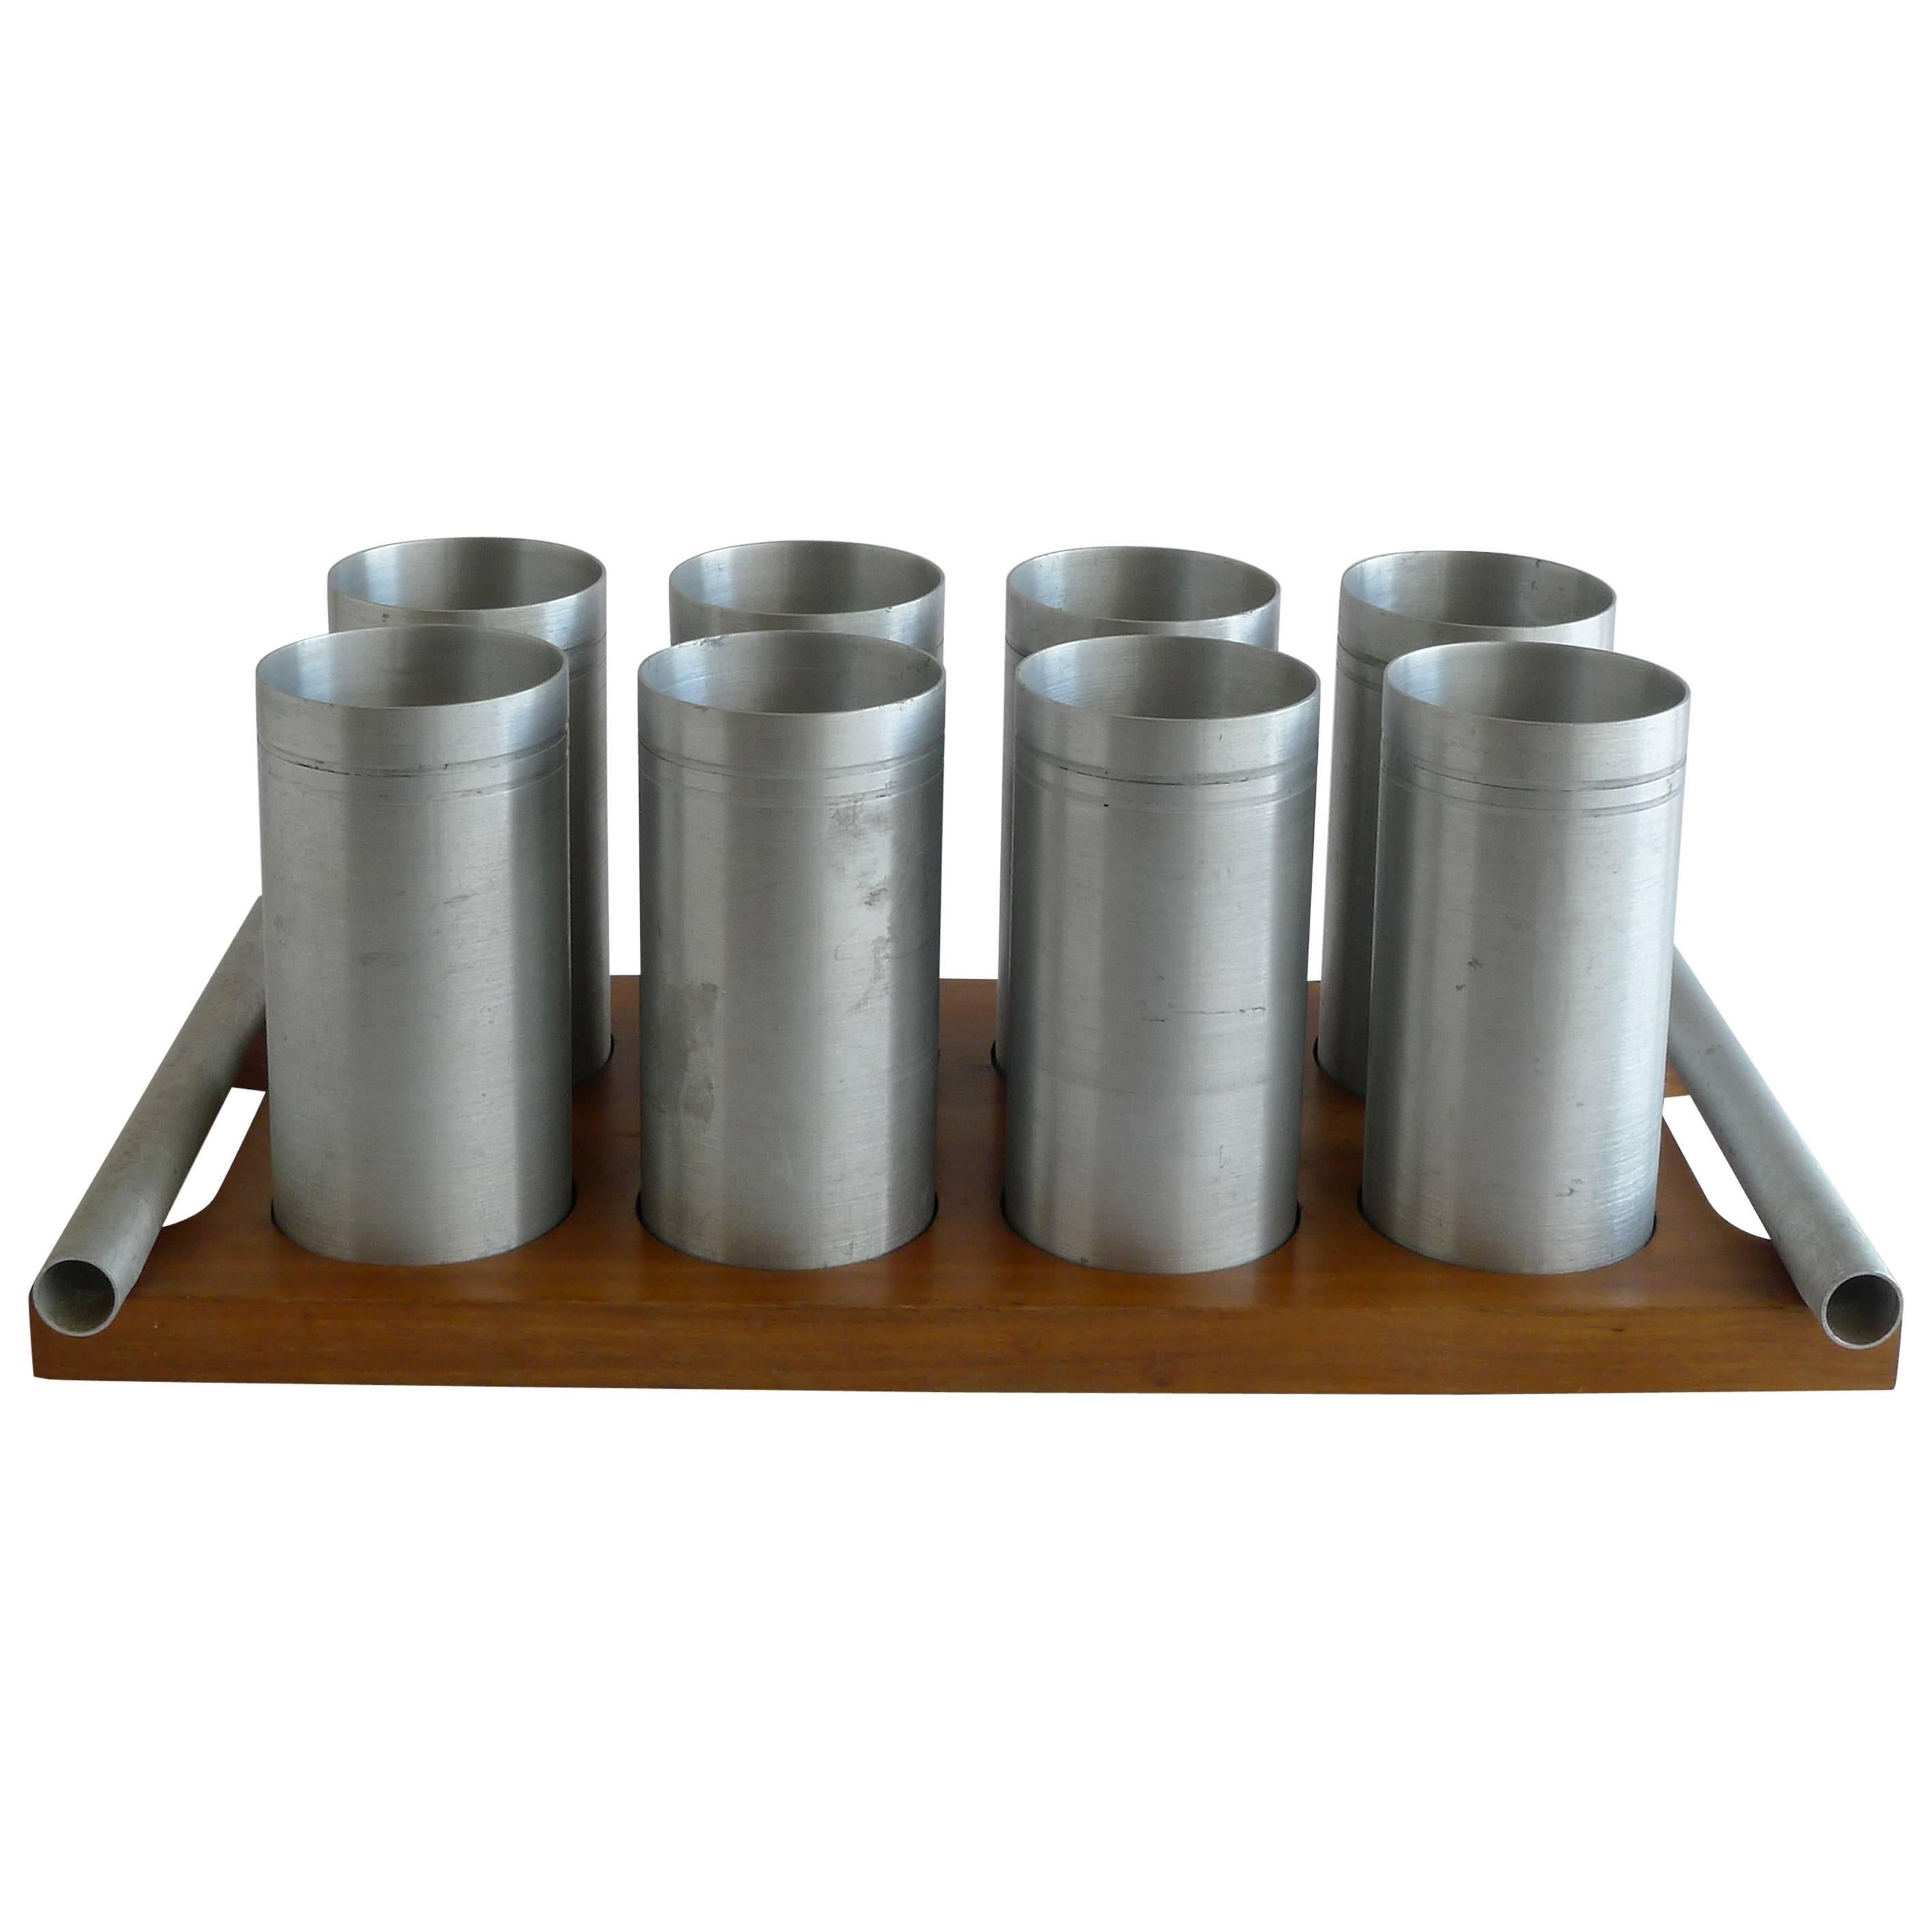 1940s Art Deco Wood and Satin Aluminium Cup Set For Sale